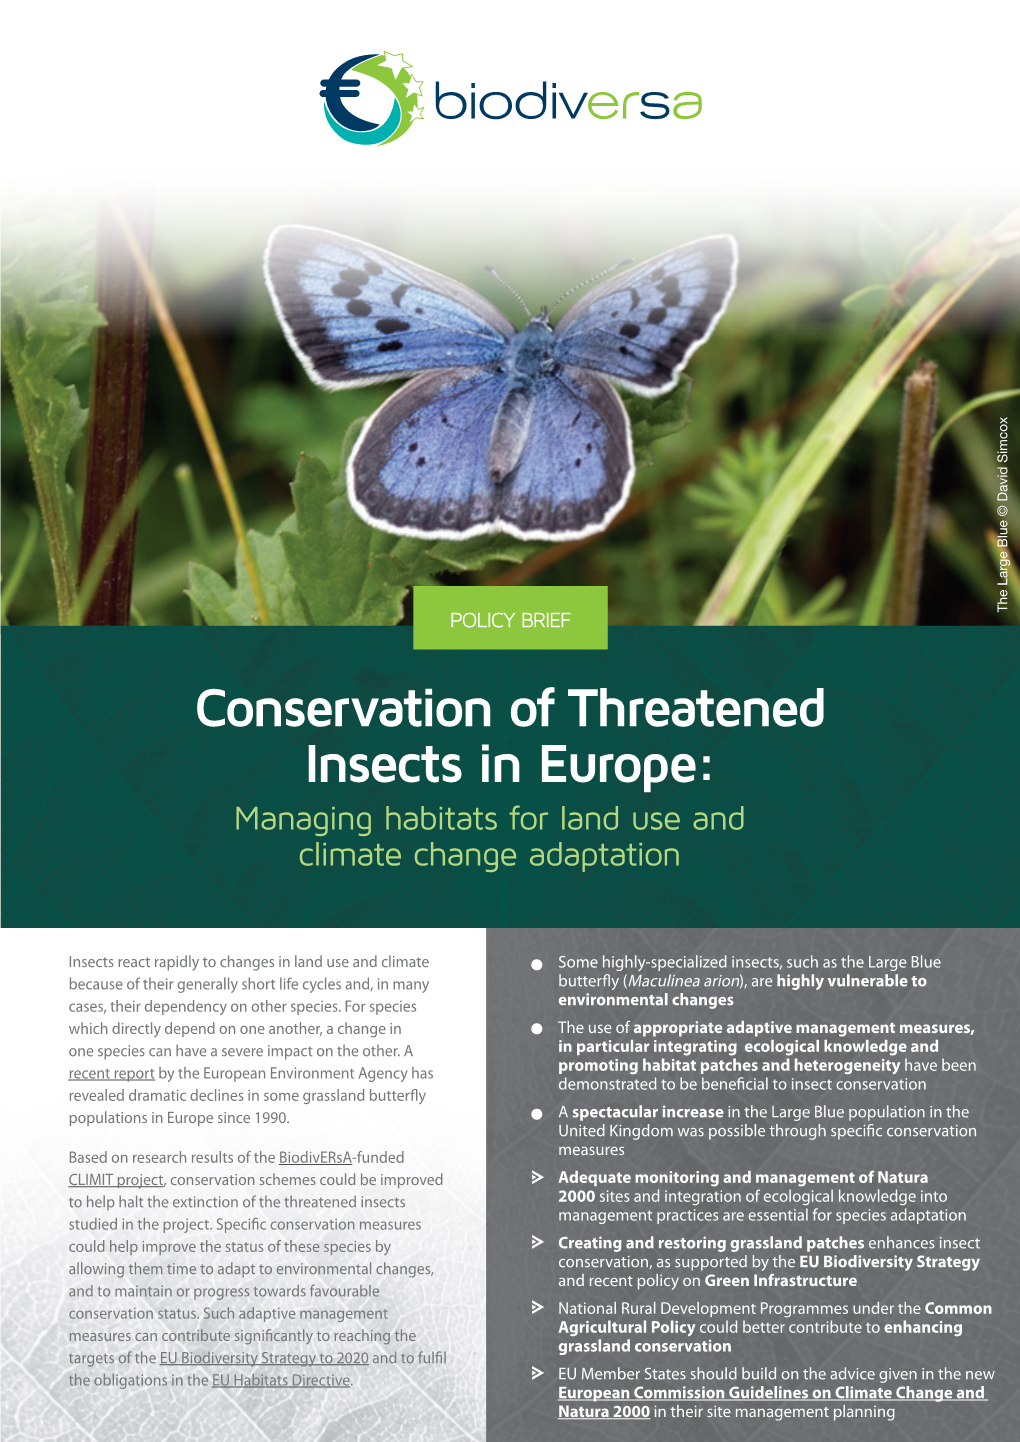 Conservation of Threatened Insects in Europe: Managing Habitats for Land Use and Climate Change Adaptation